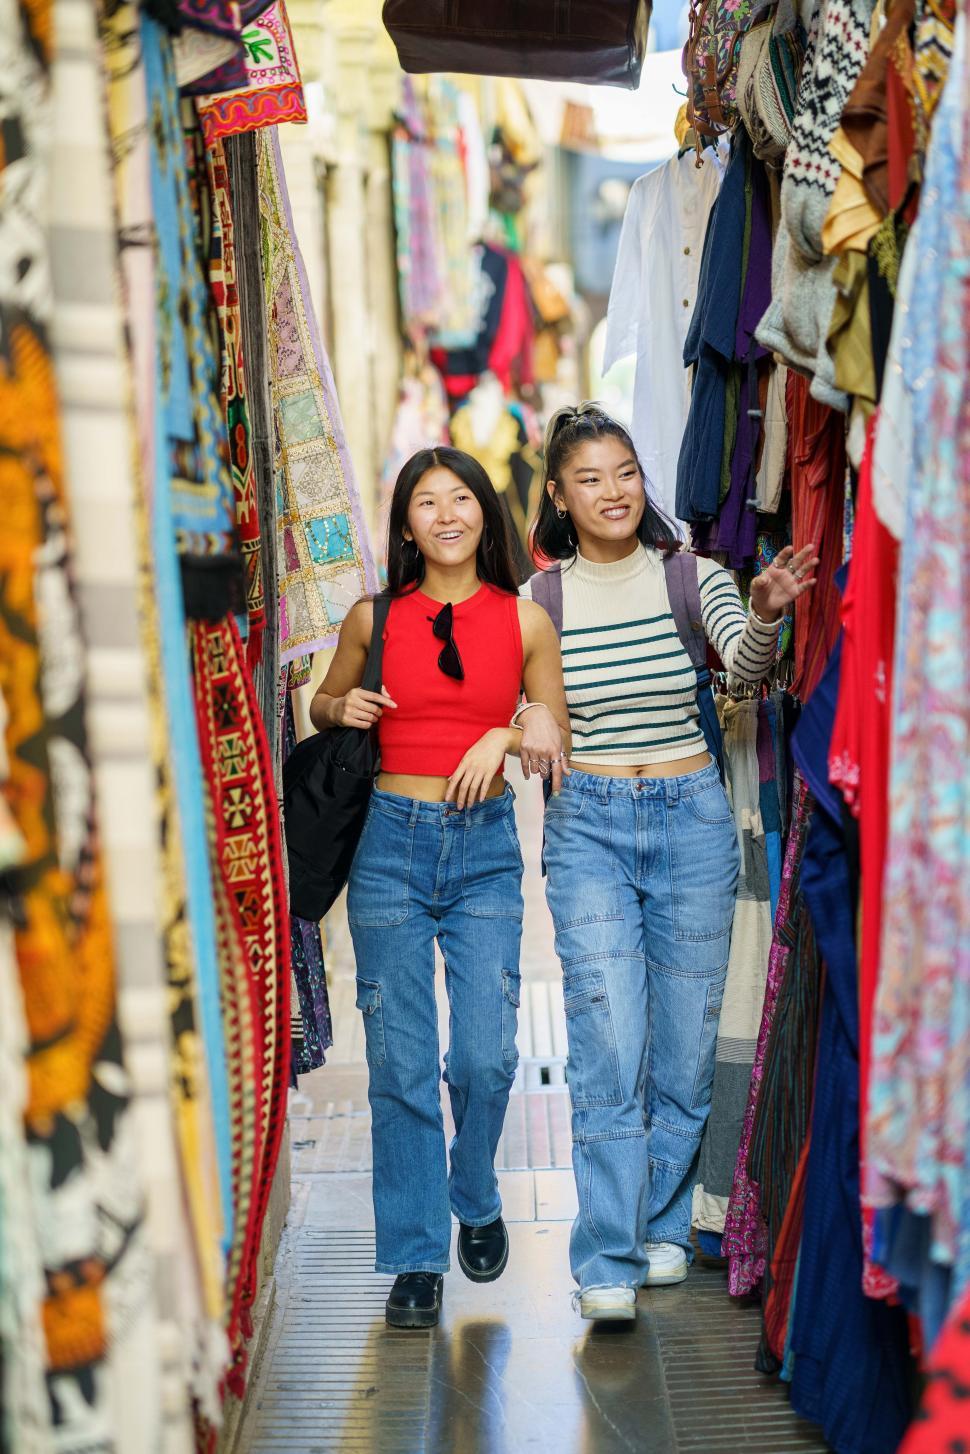 Free Image of Female tourists shopping clothes in street bazaar 